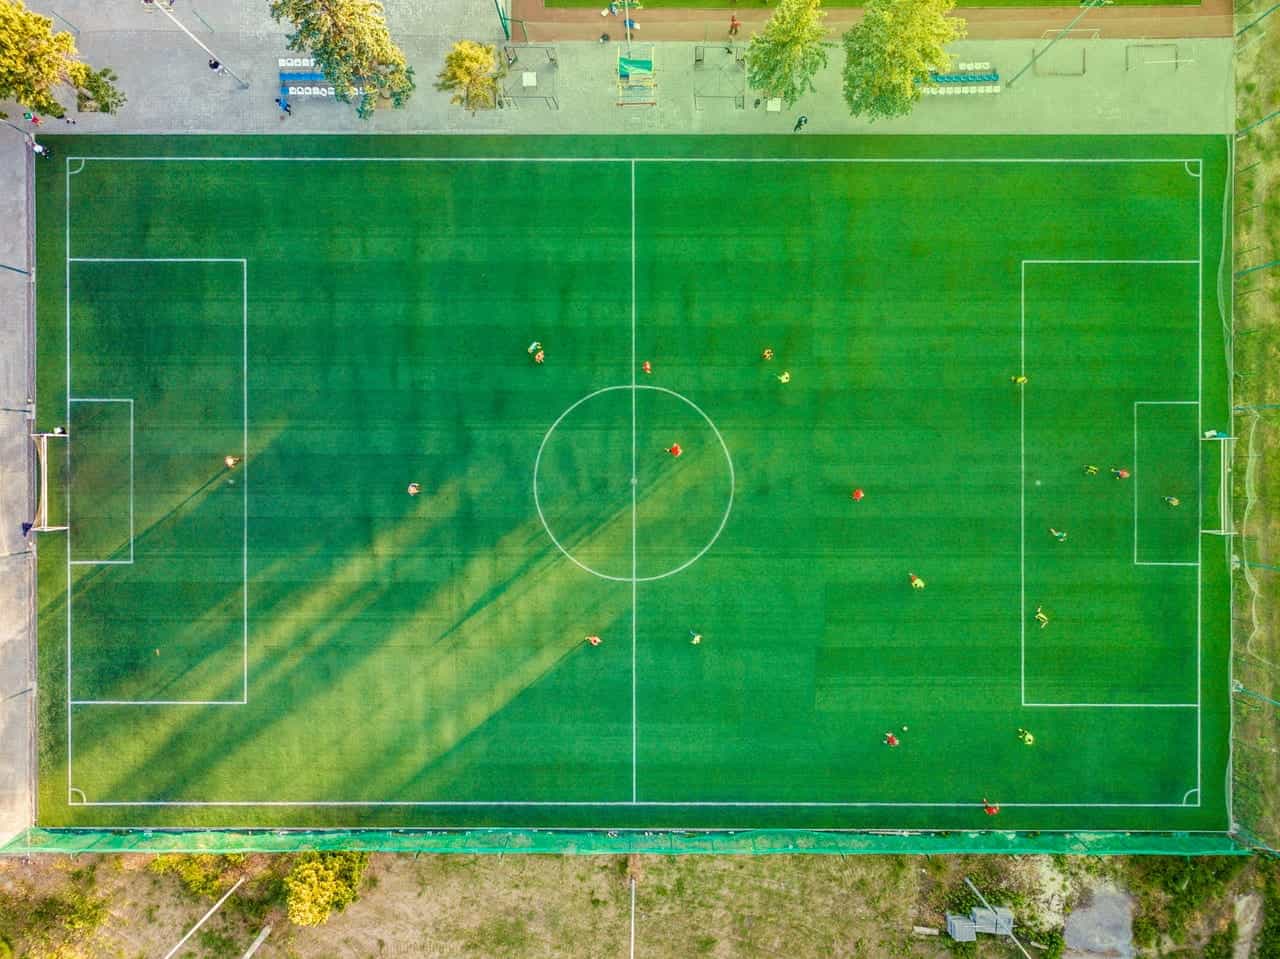 A football pitch with players.